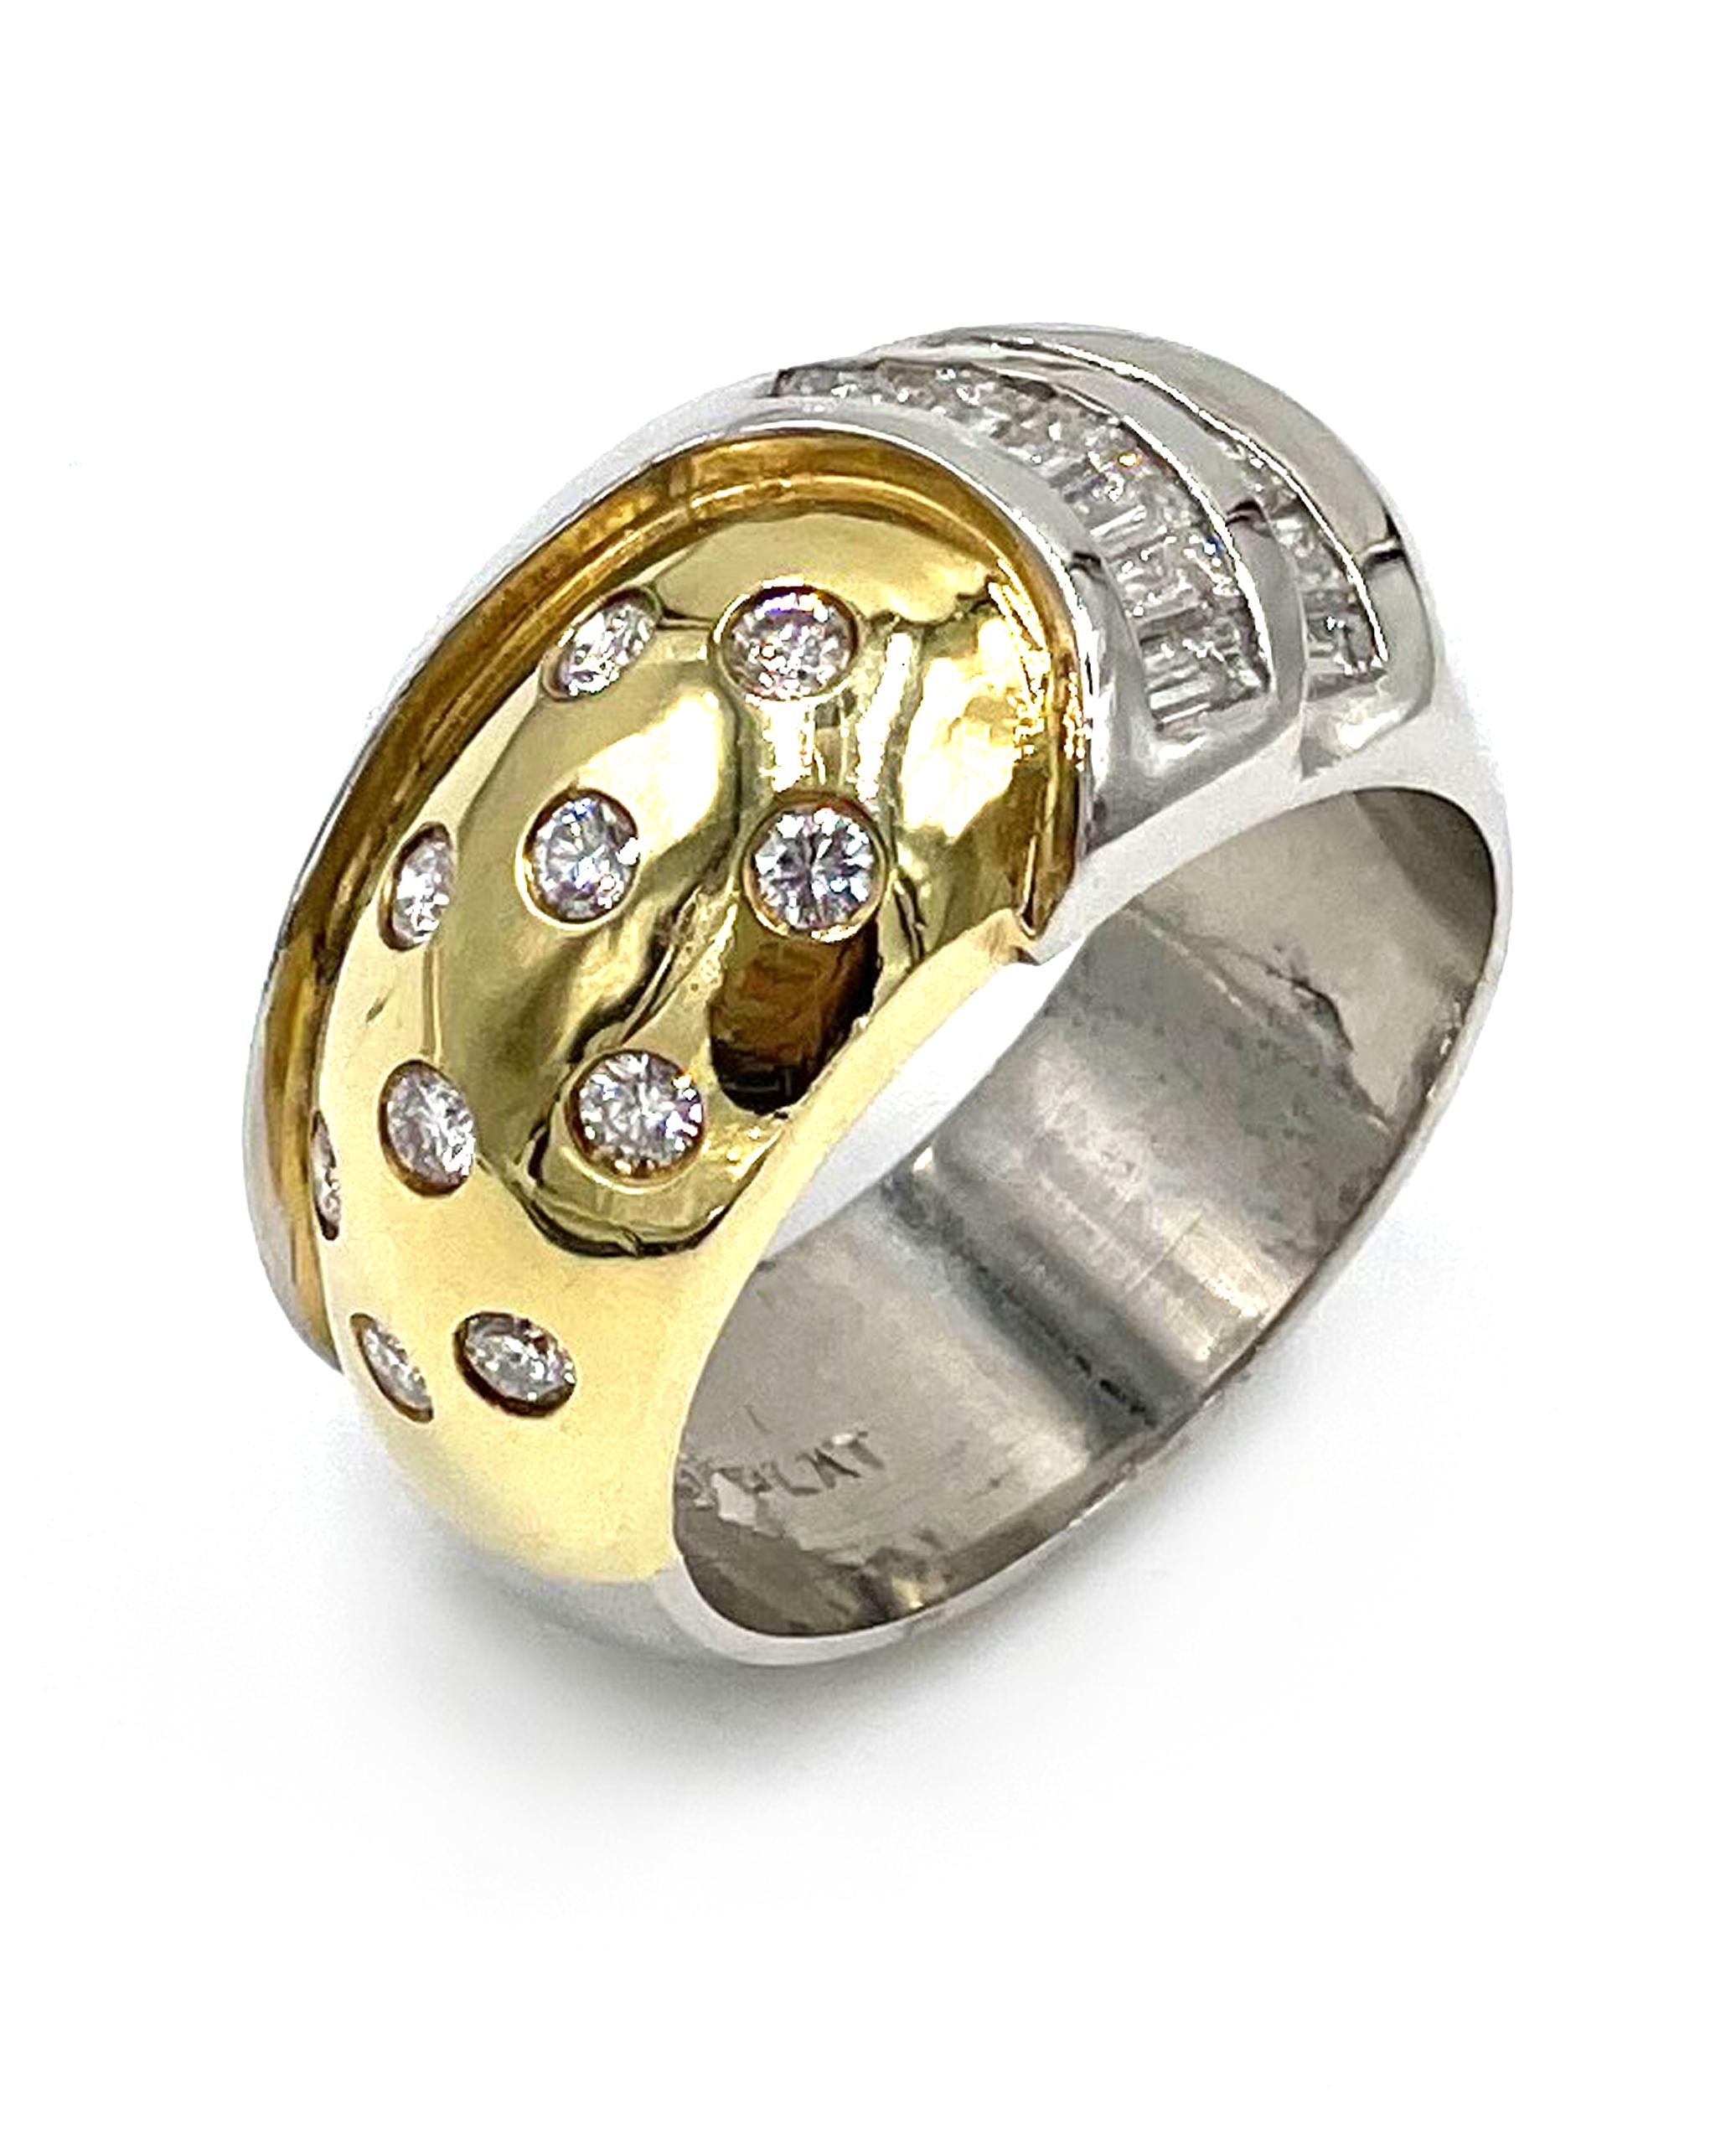 Vintage Platinum and 18K yellow gold ring with 13 baguette diamonds and 10 round diamonds totaling 0.88 carats. G/H color, VS clarity. (Created circa 1990)

-Finger size: 6.5